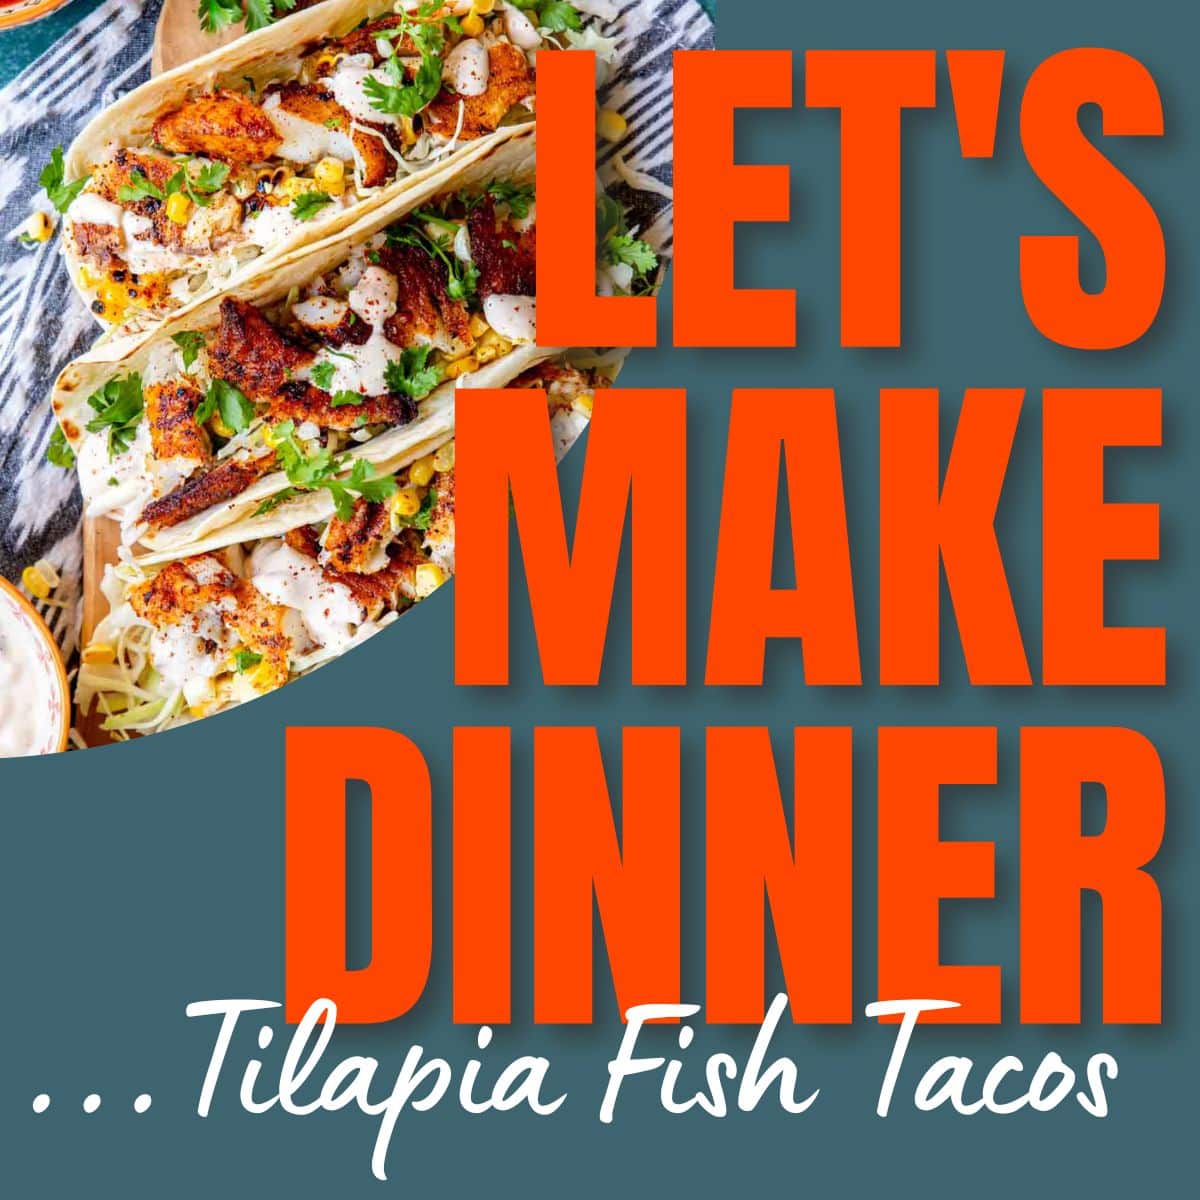 let's make dinner text and a picture of tilapia fish tacos